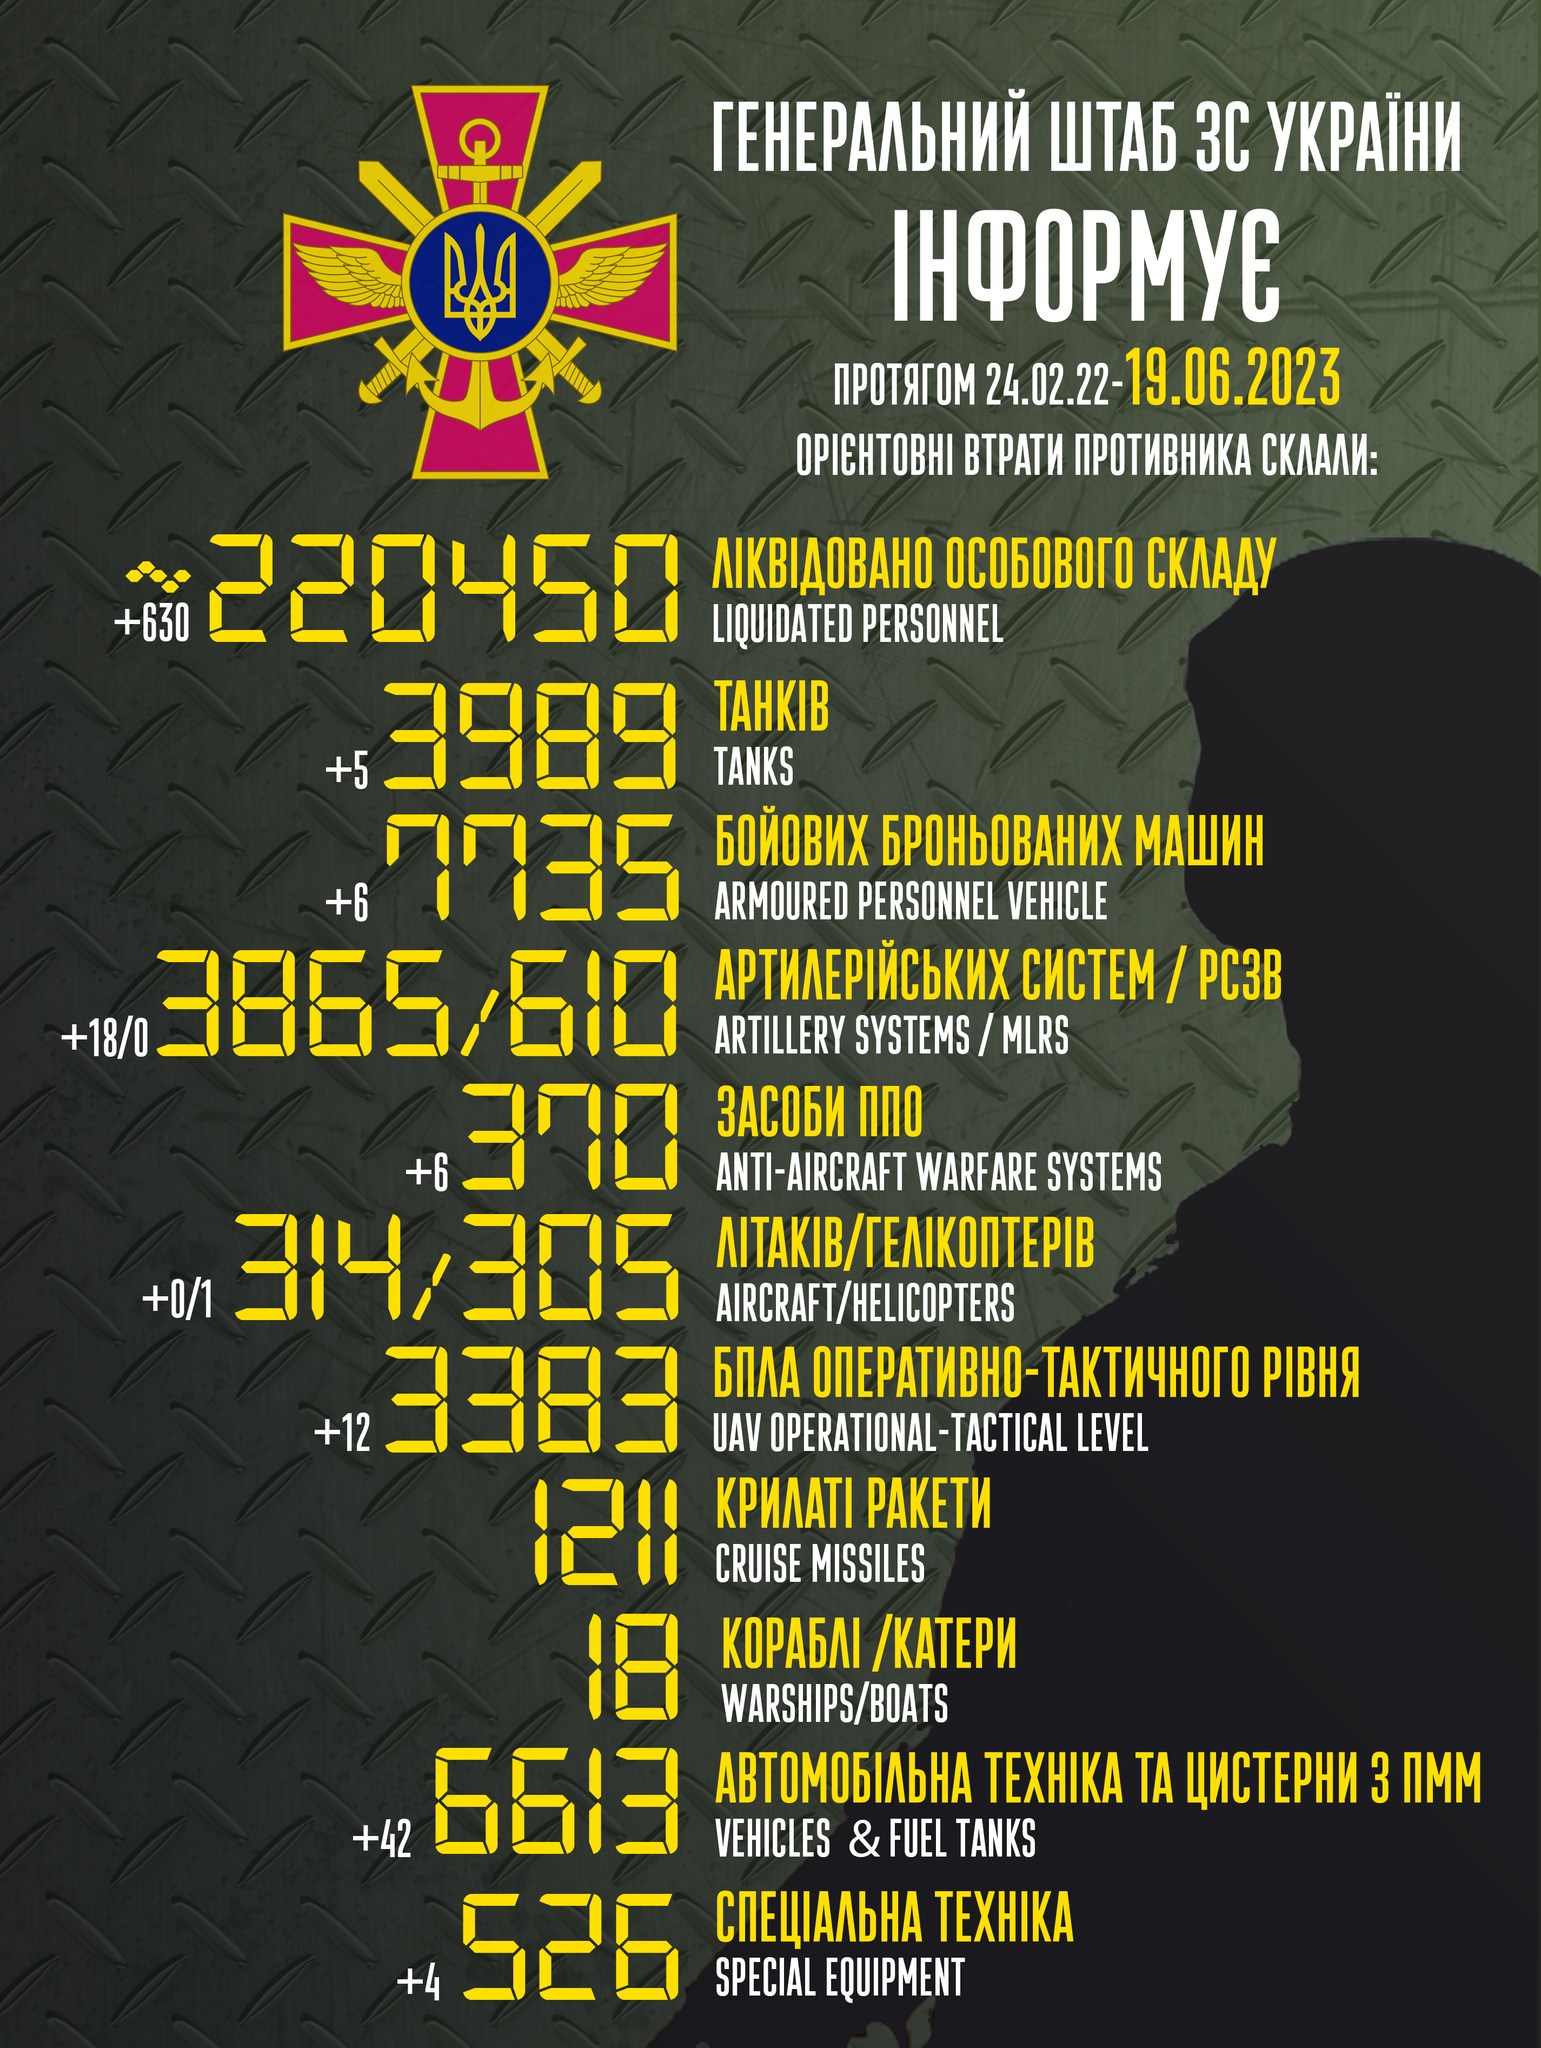 481 days of Russia-Ukraine war: Ukrainian ministry releases list of losses suffered by Russian army (Image courtesy: Twitter)